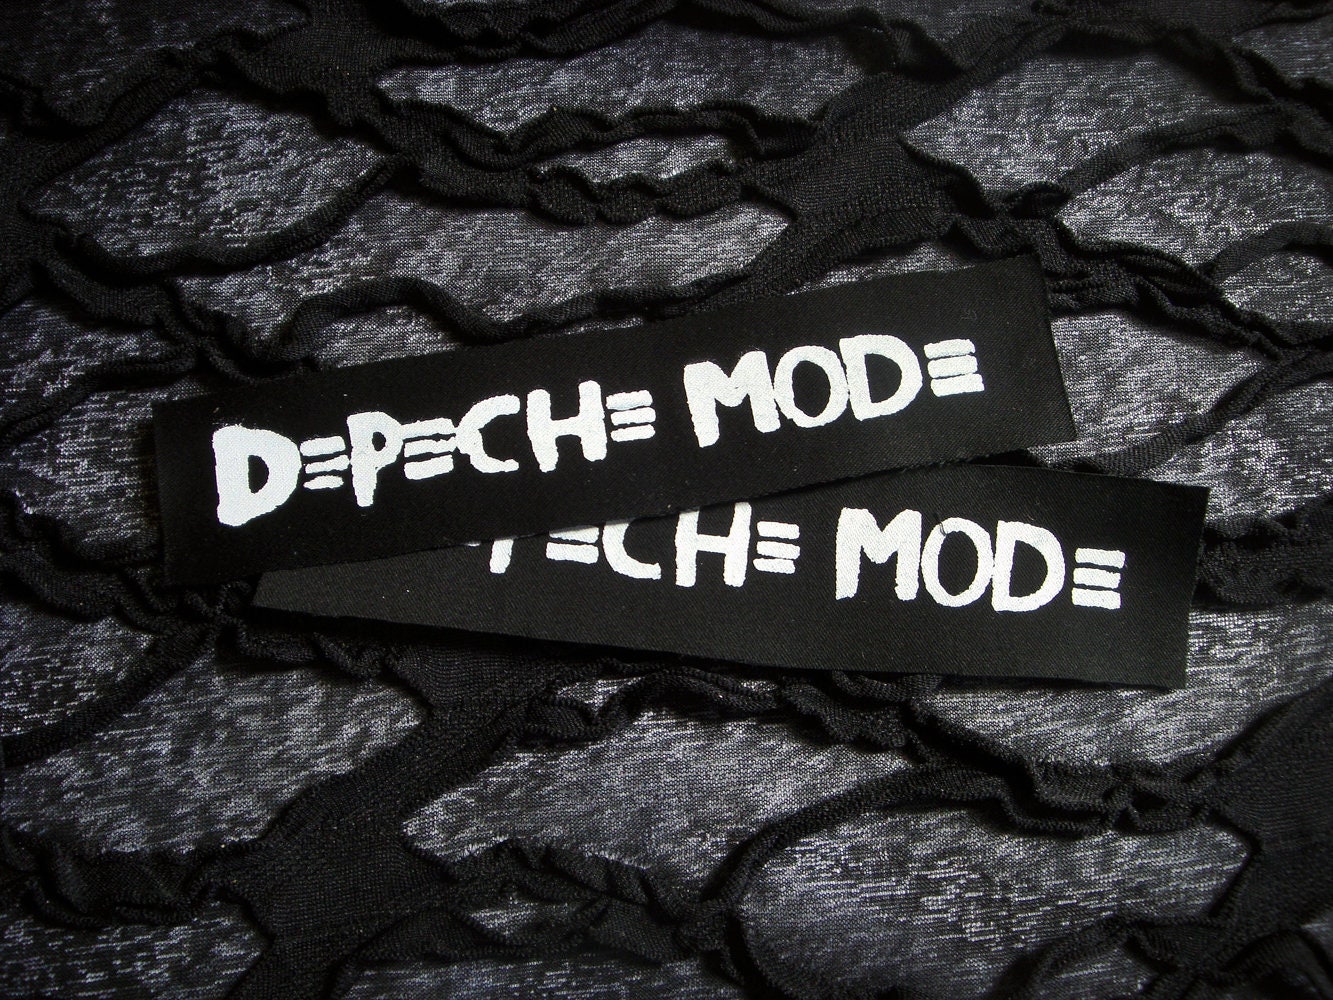 Depeche Mode Embroidered Patch, Classic Logo, Size: 3.7 x 1.9 inches